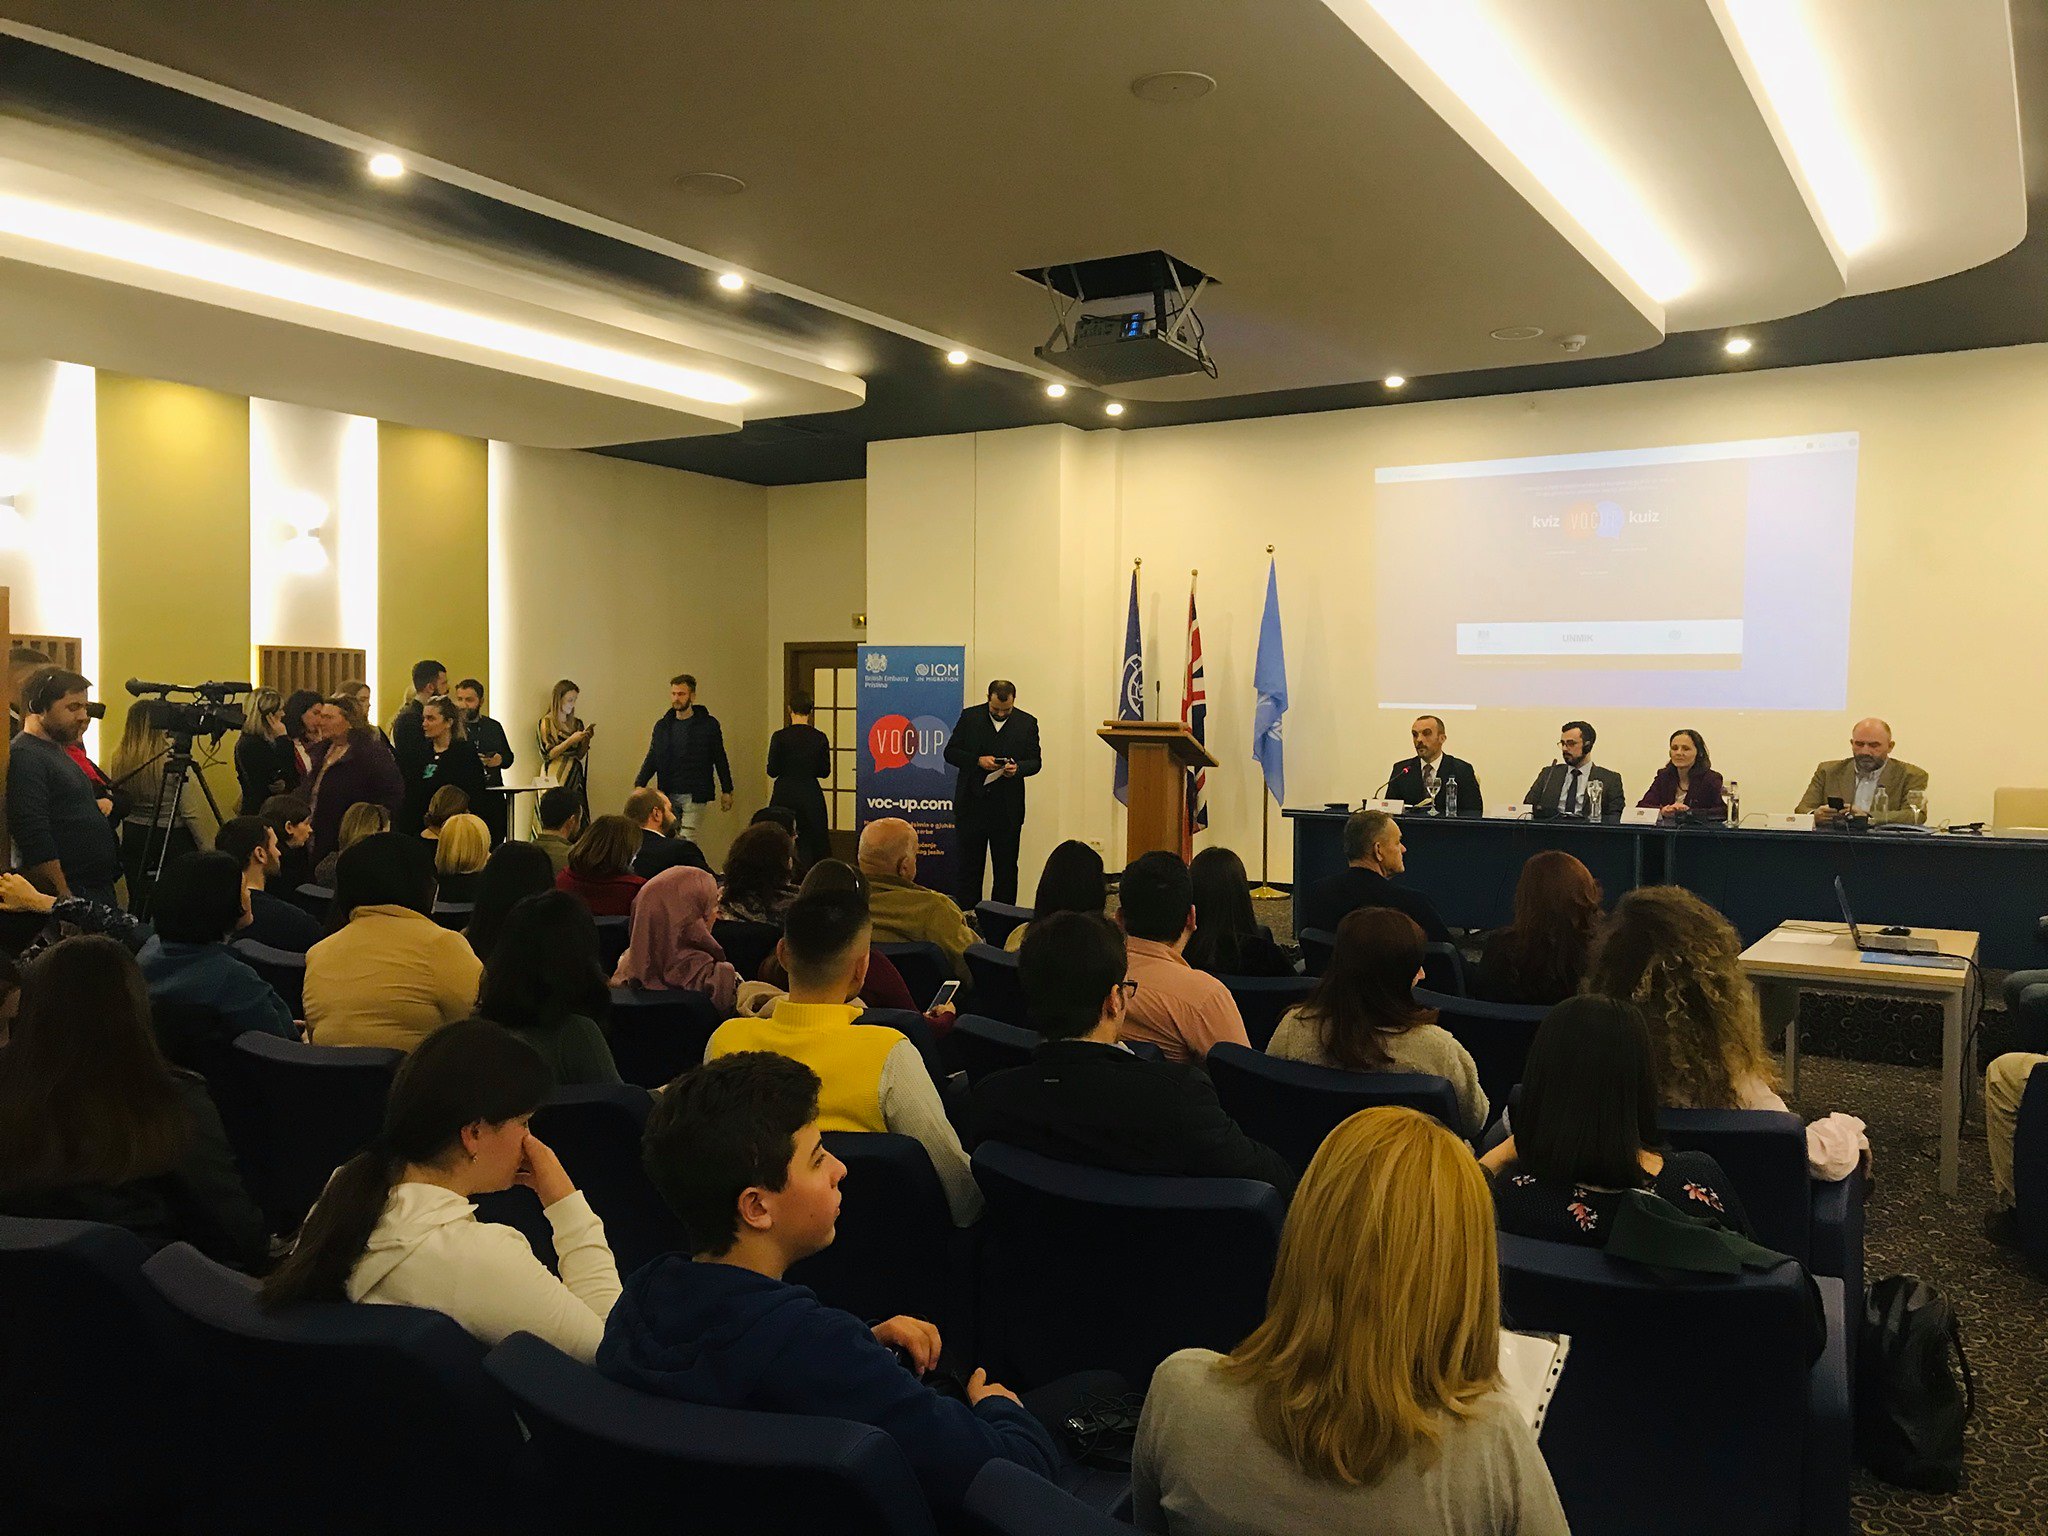 International Mother Language Day event organized by the Office of the Language Commissioner, the British Embassy Pristina and the IOM, 21 February 2020